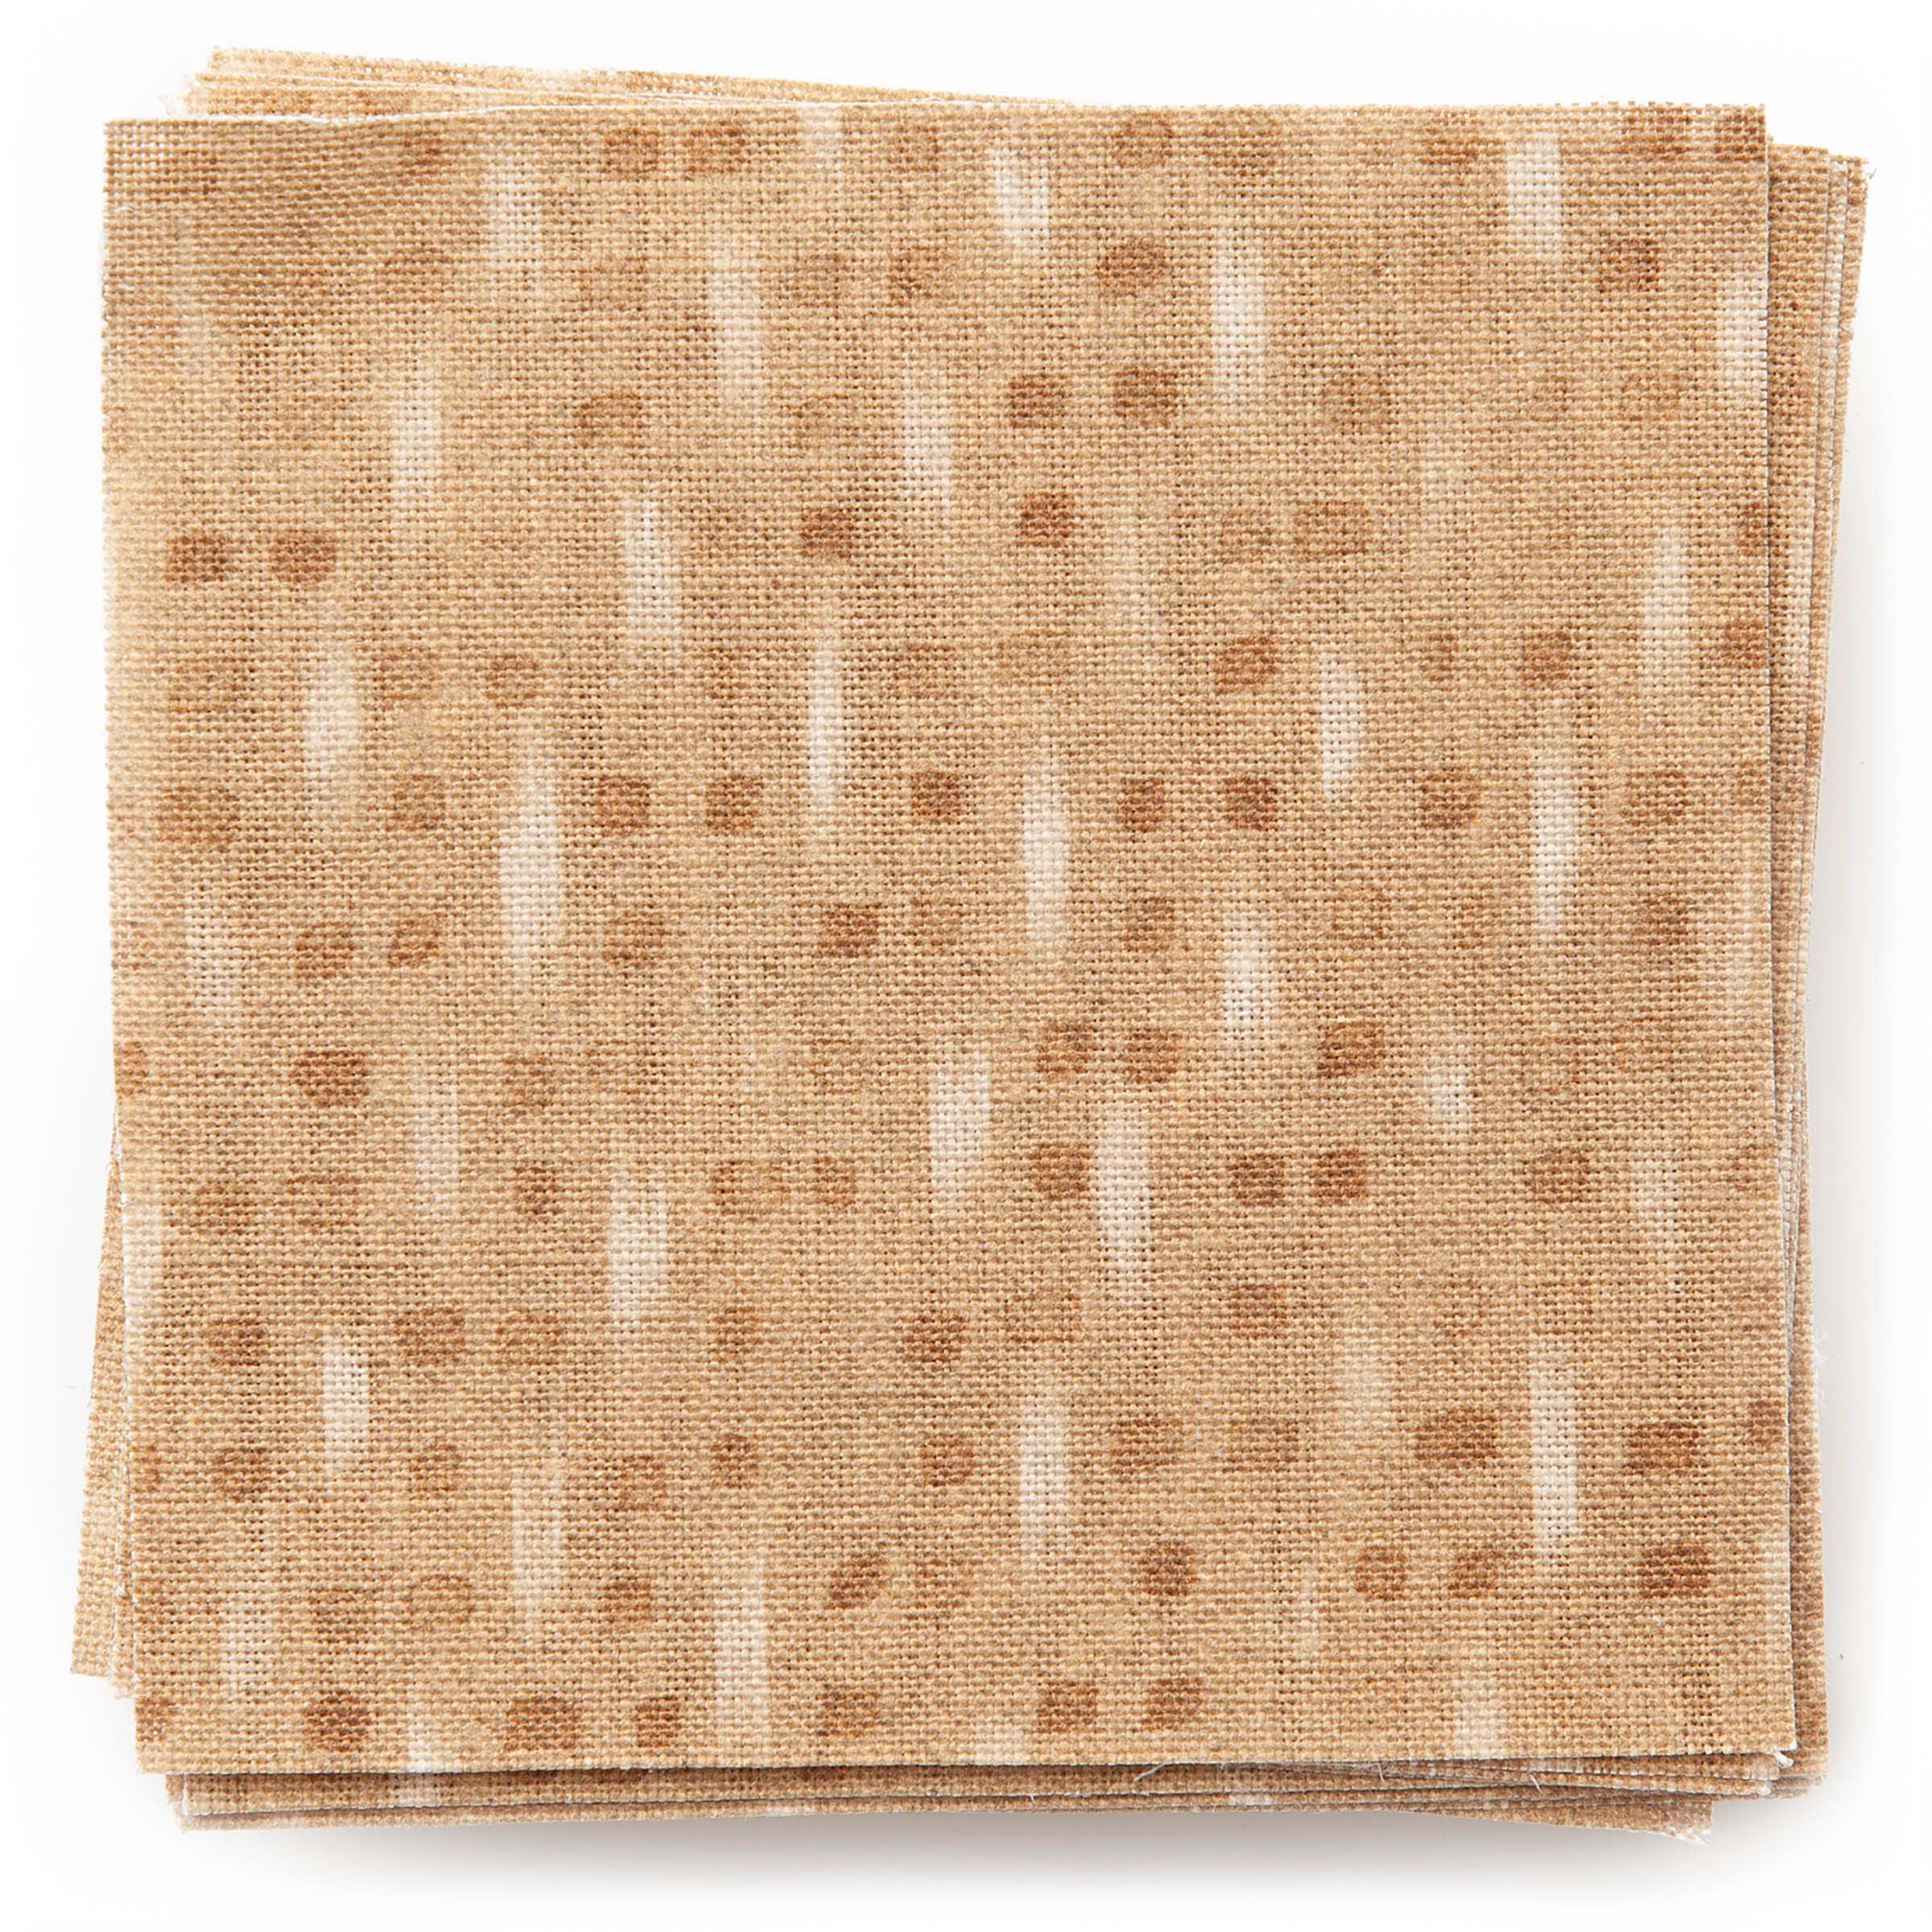 A stack of fabric swatches in a small-scale dot and dash pattern in shades of cream and brown on a bronze field.